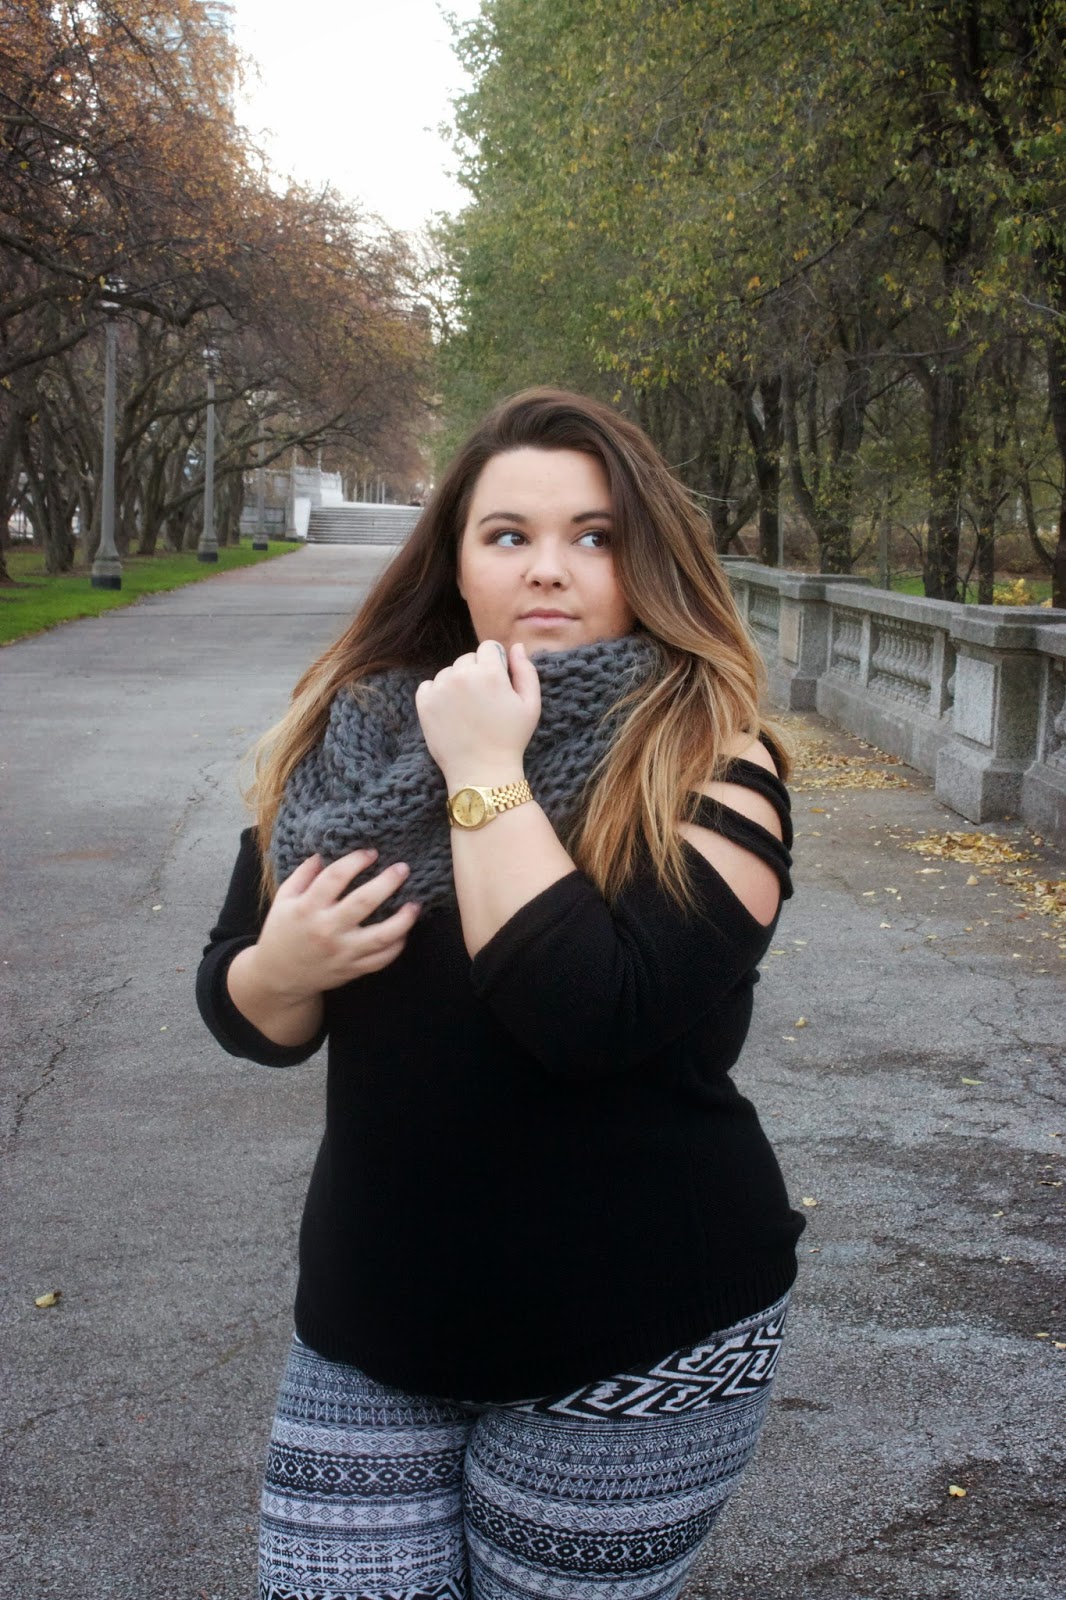 ANKLE BOOTS WITH PLUS SIZE LEGGINGS - Natalie in the City